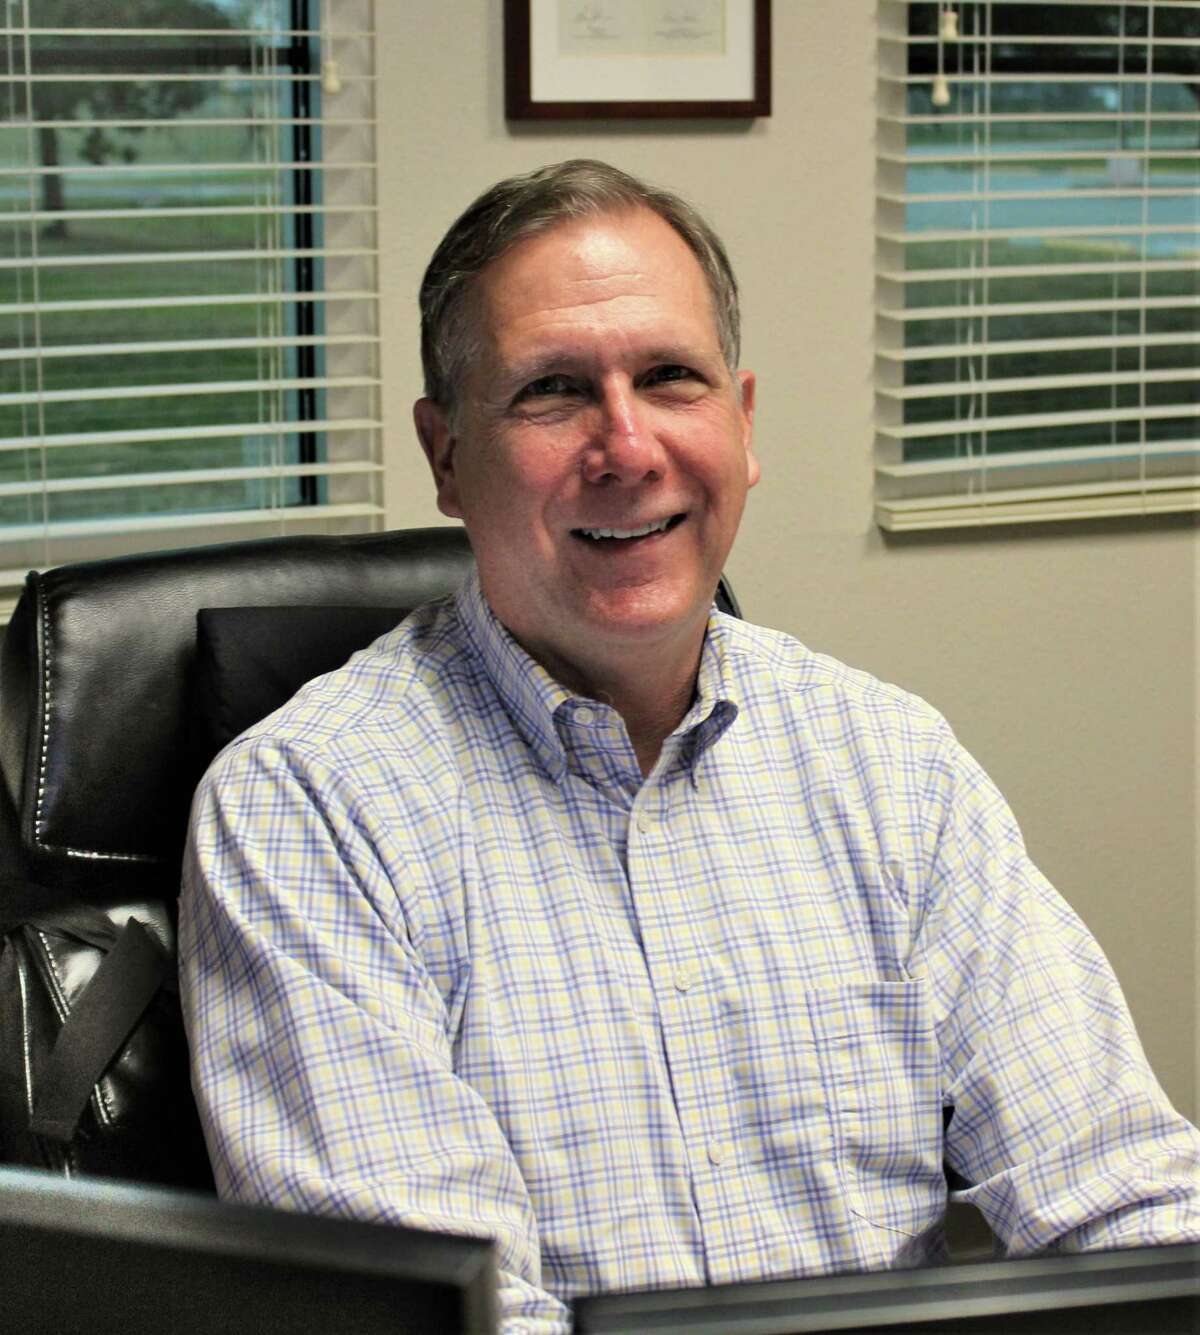 Schertz City Manager Dr. Mark Browne, 67, announced in late March that he will retire from his position Nov. 23.